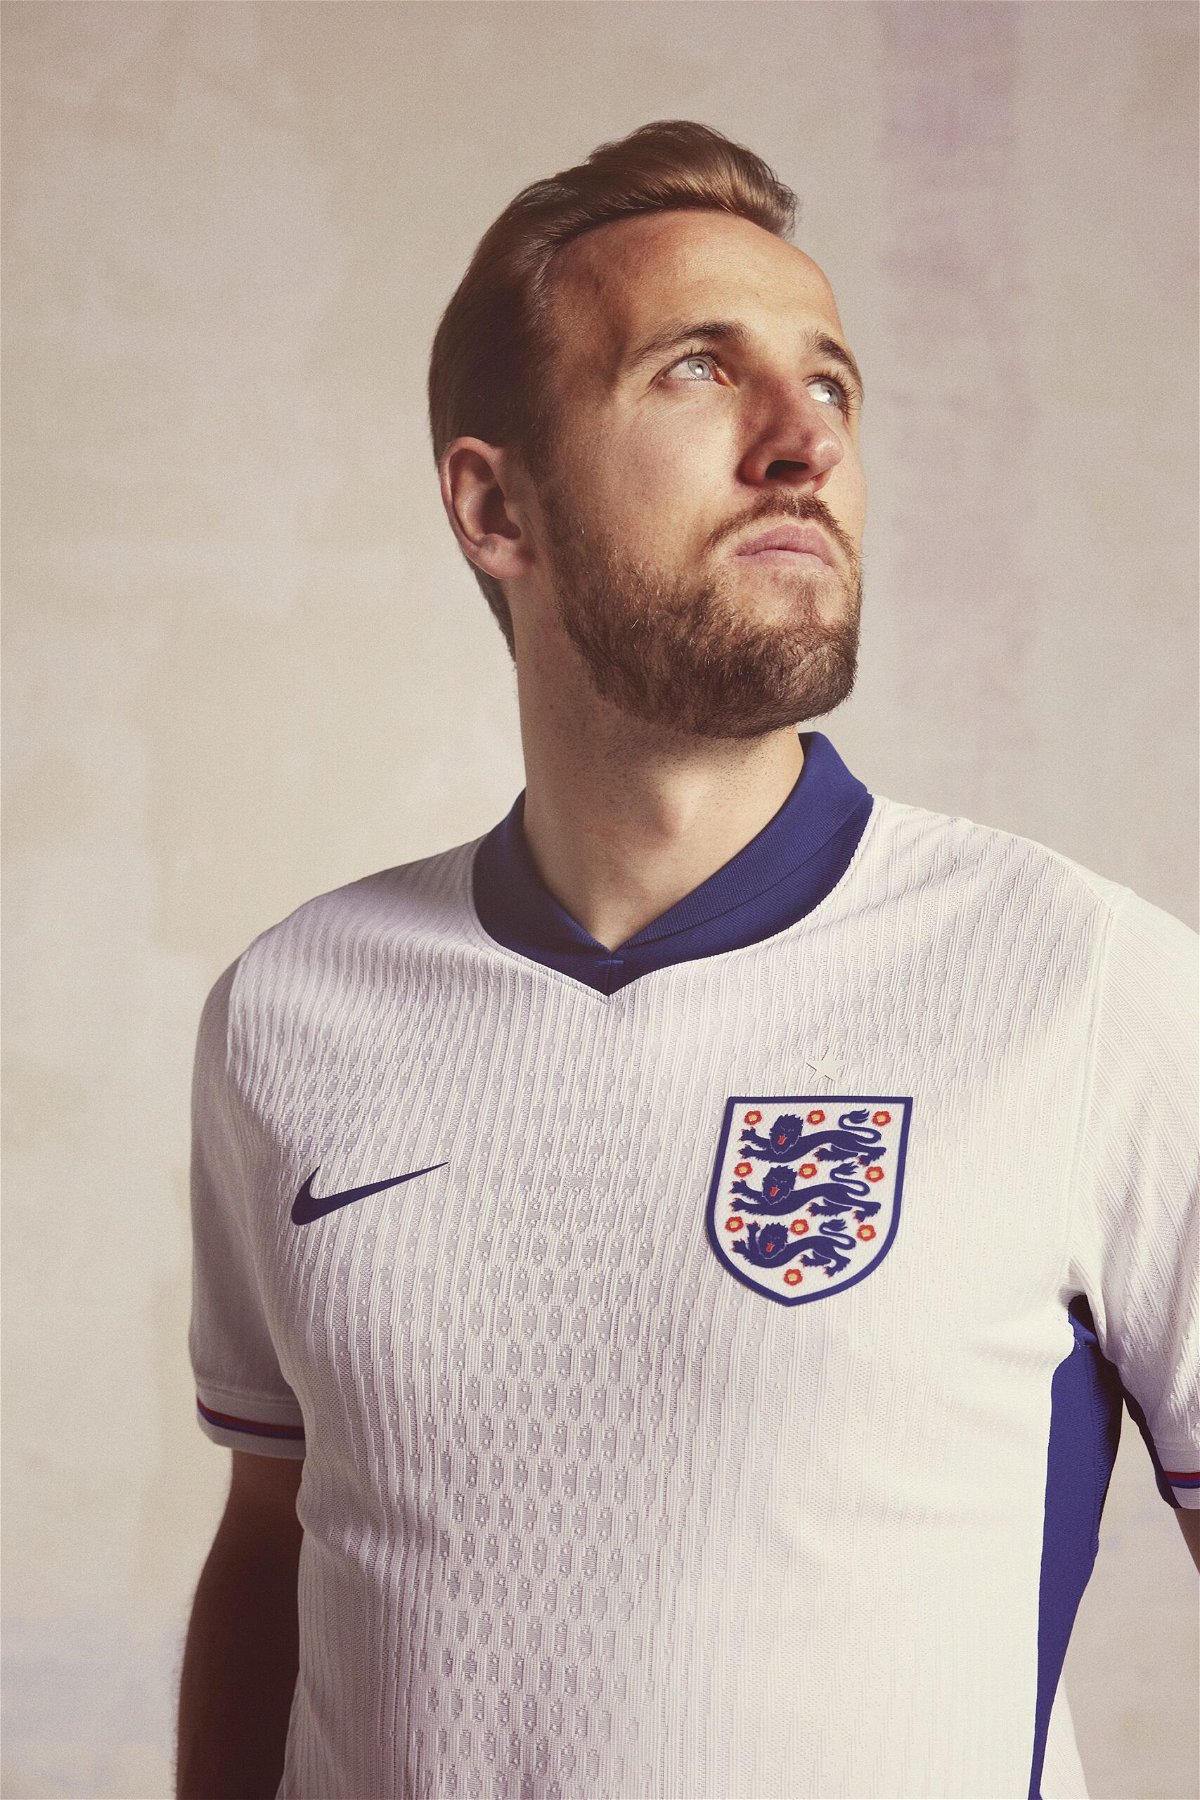 <i>The FA/Getty Images via CNN Newsource</i><br/>England captain Harry Kane wears his national team's new kit.